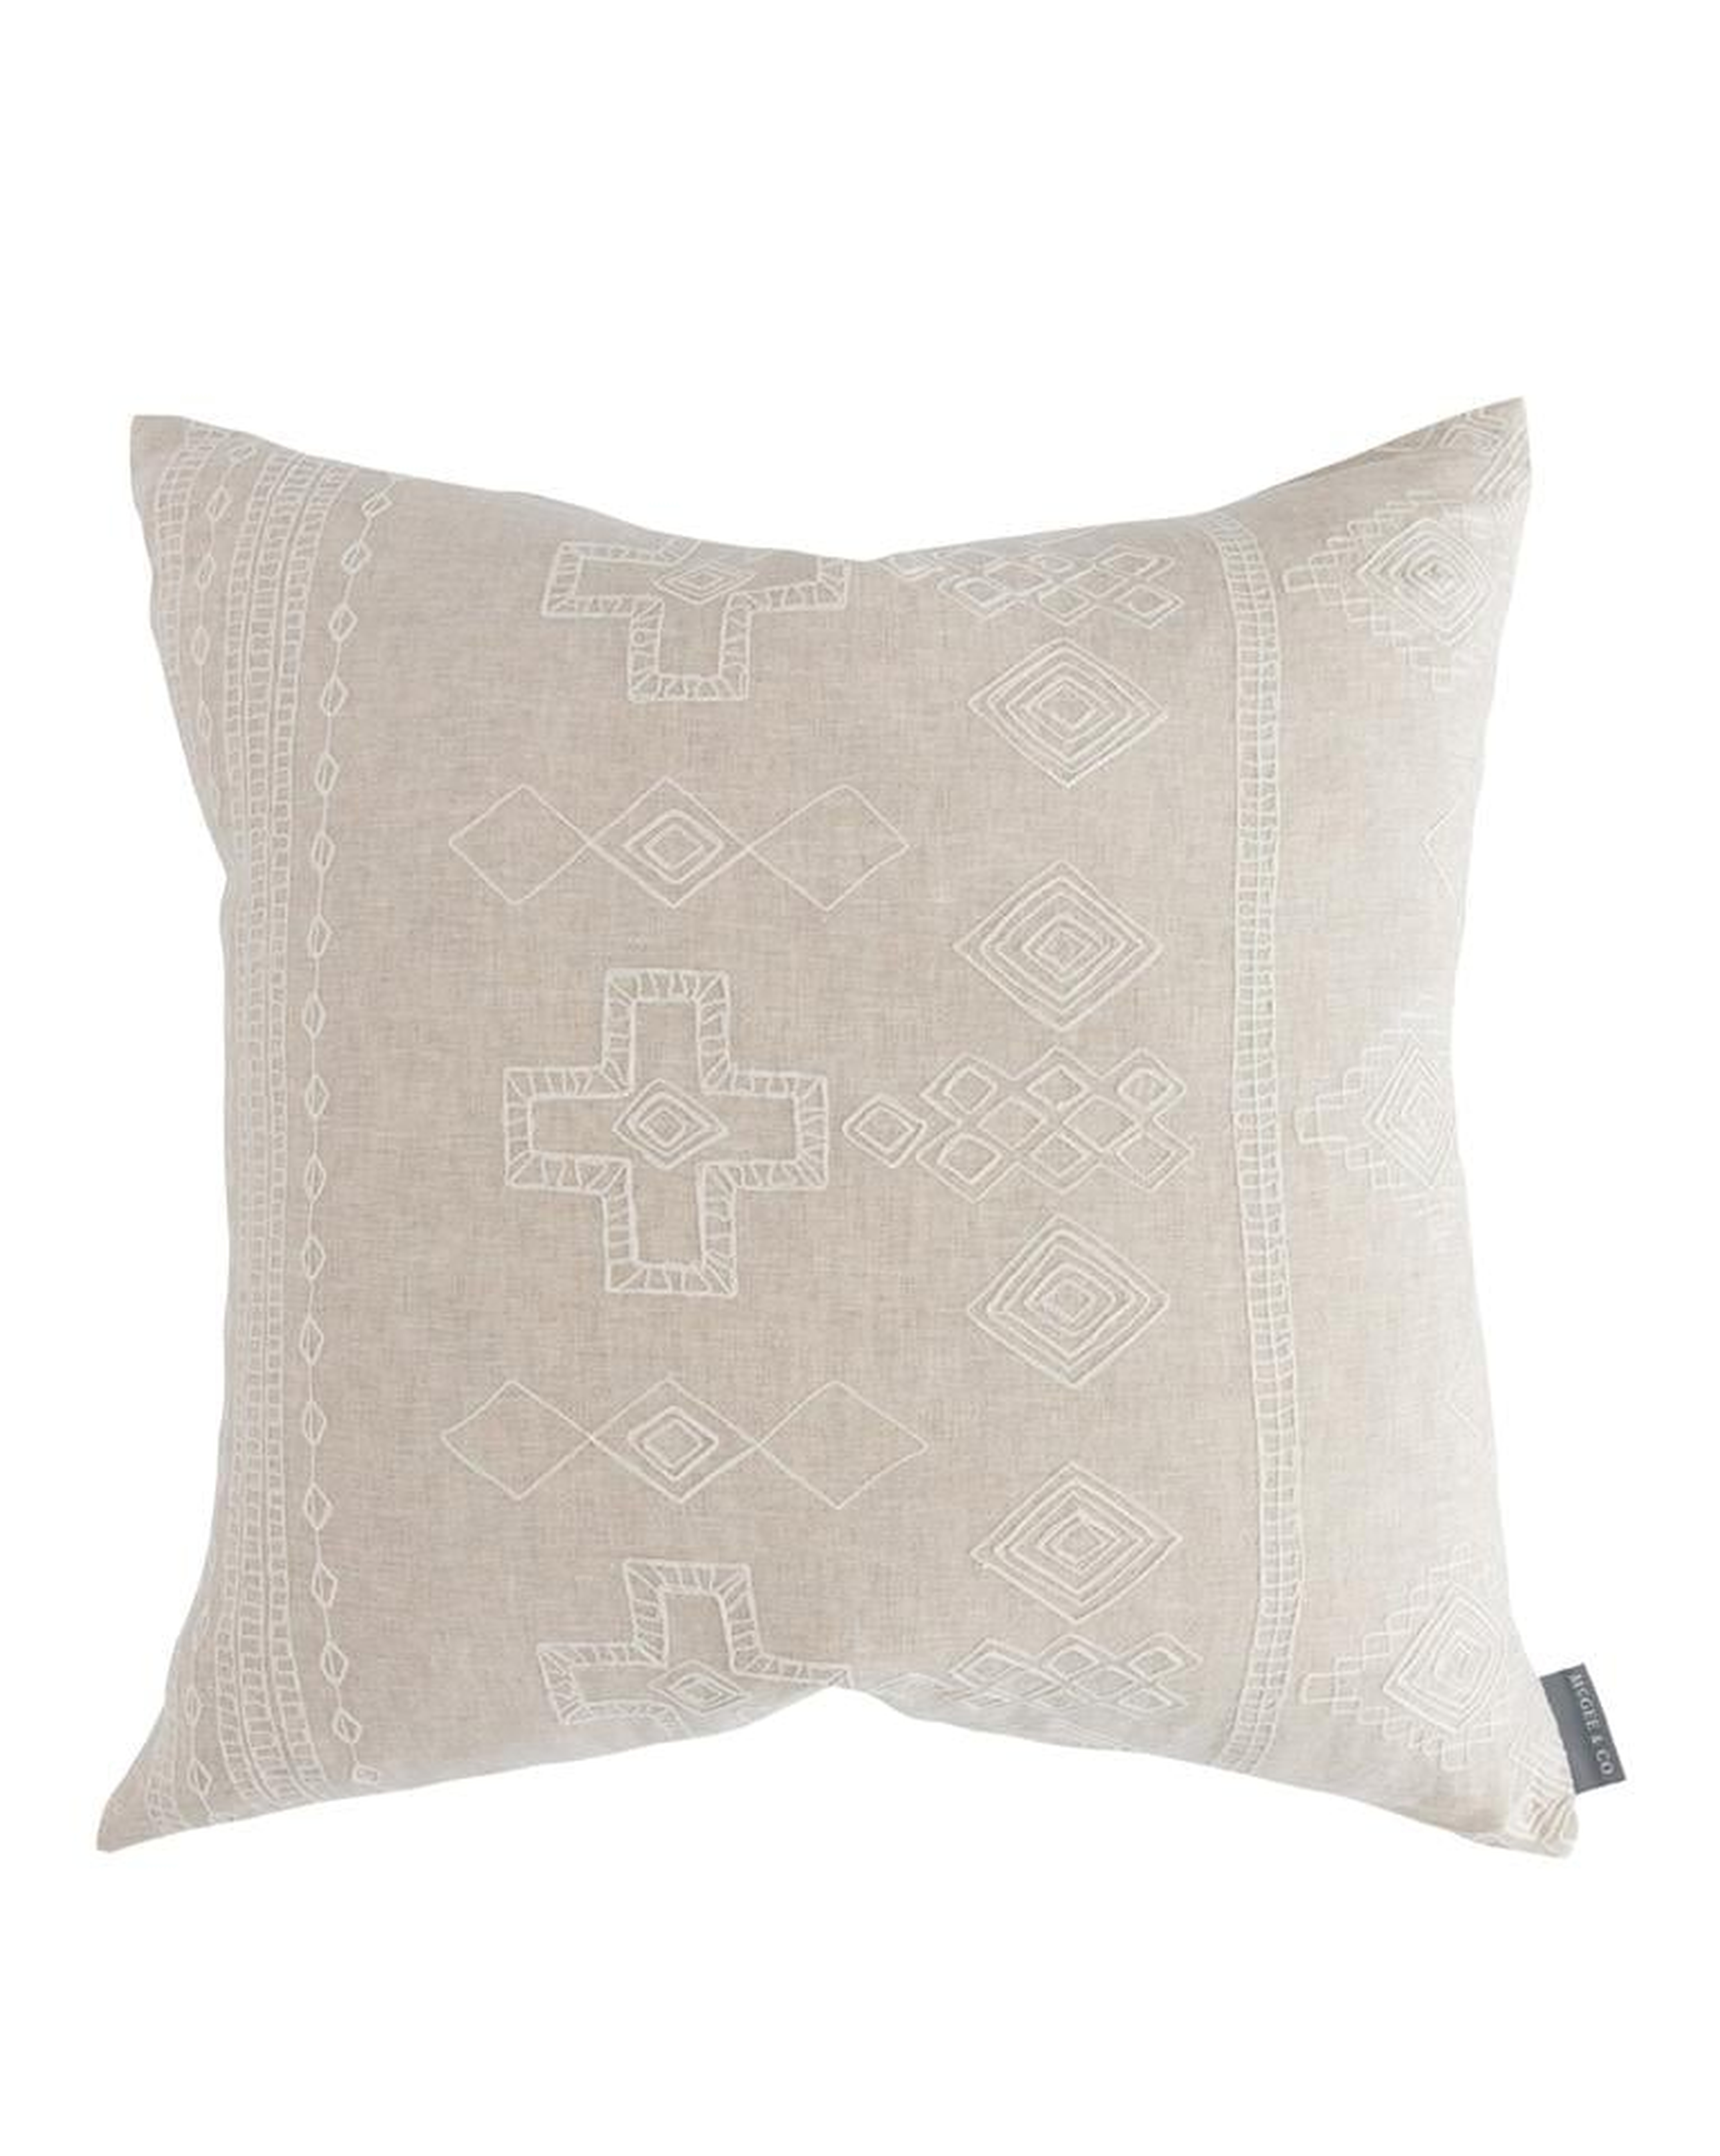 Jamille Woven Pillow Cover, 24" x 24" - McGee & Co.